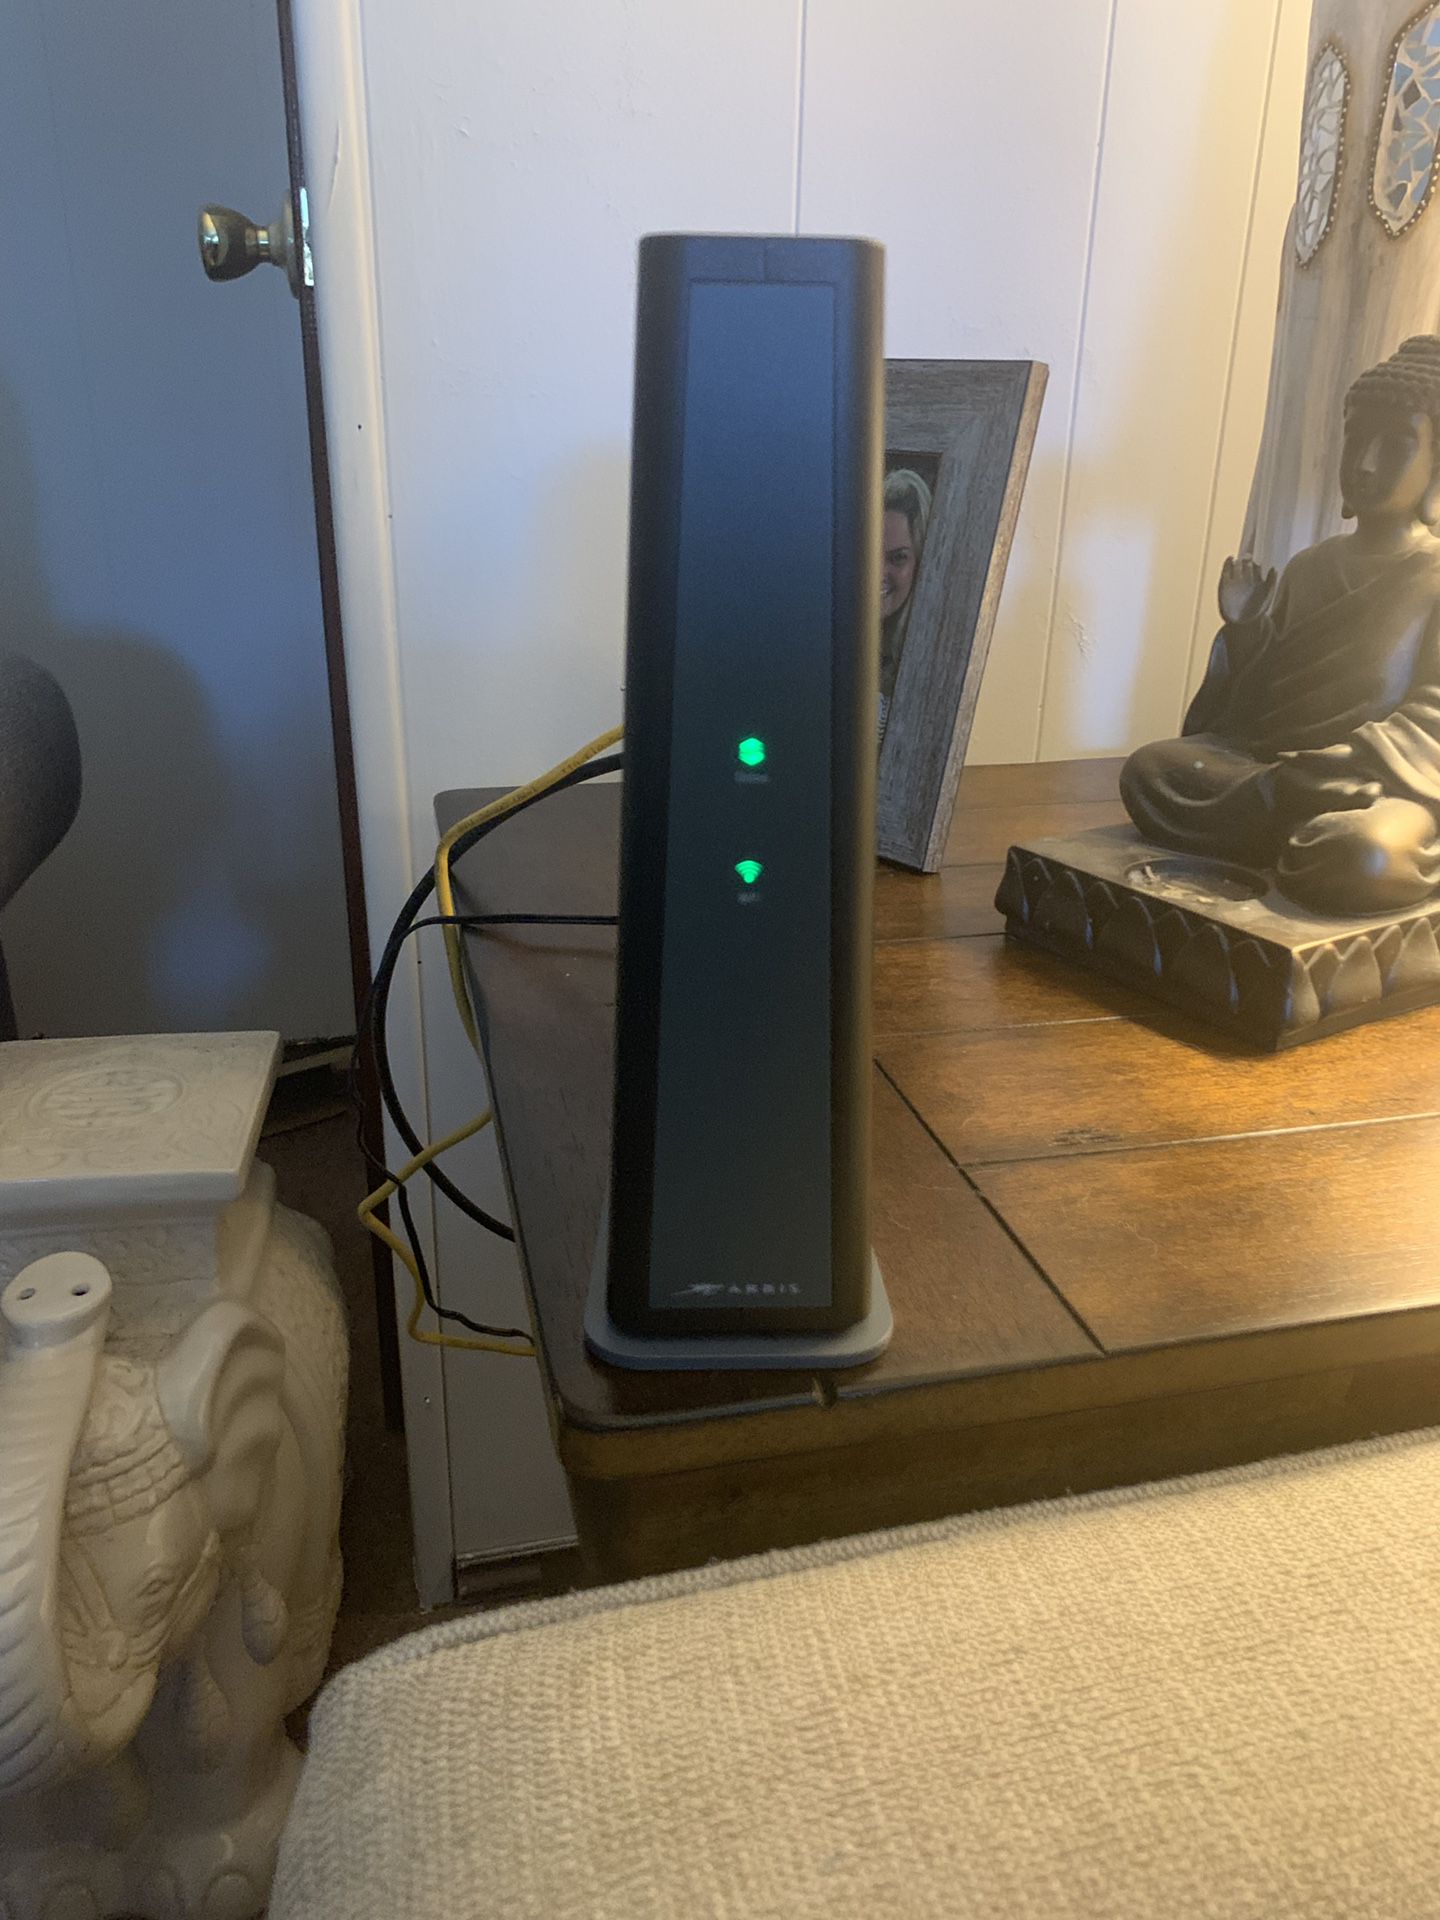 Arris Router Modem for WiFi